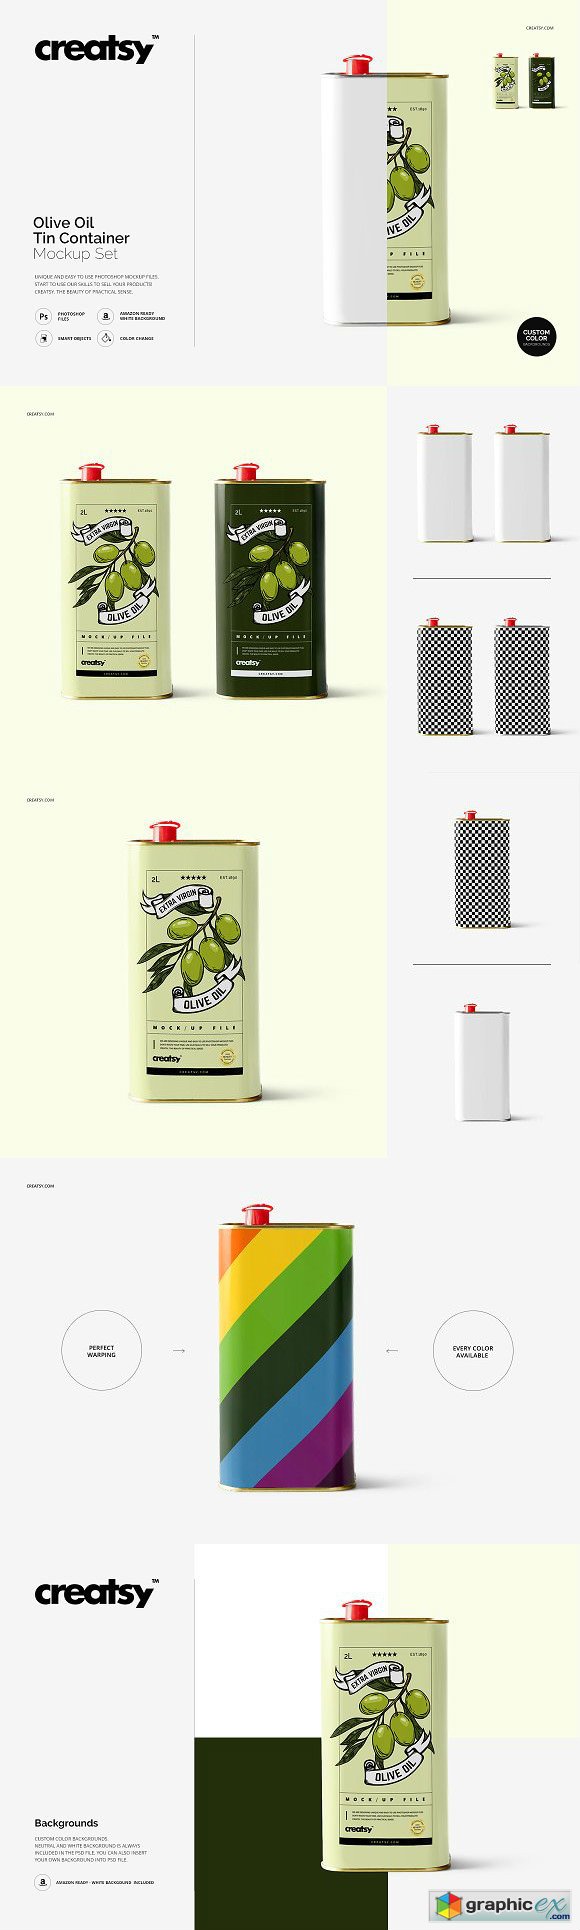 Olive Oil Tin Container Mockup Set